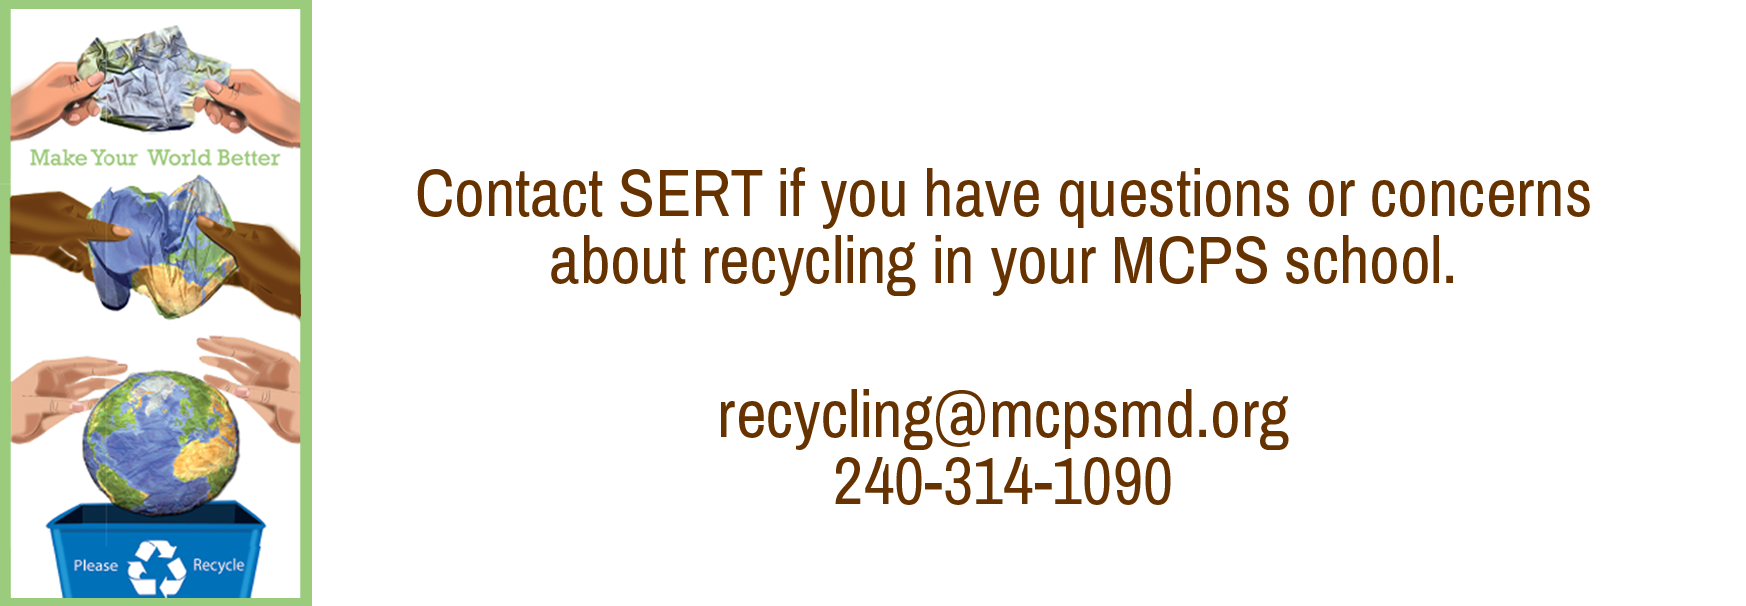 Image shows a crumpled page being transformed into a globe. Email SERT at recycling at mcpsmd dot org. The telephone number is 240-314-1090.